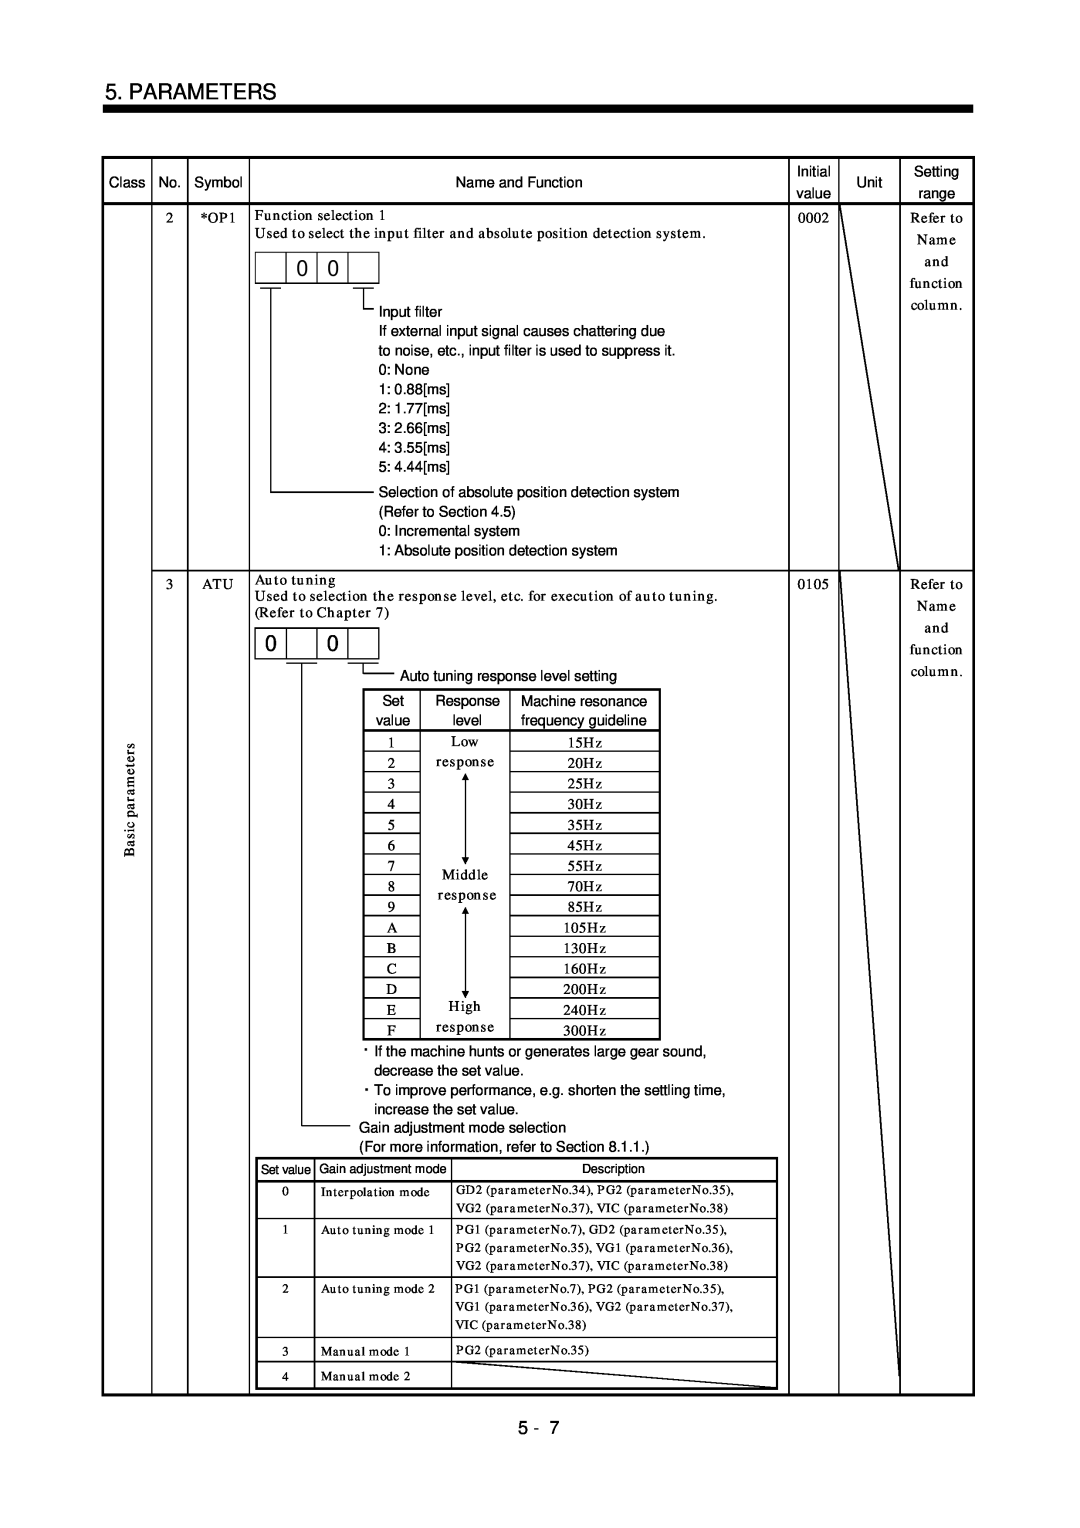 Mitsubishi Electronics MR-J2S- CL specifications Parameters, Class No 